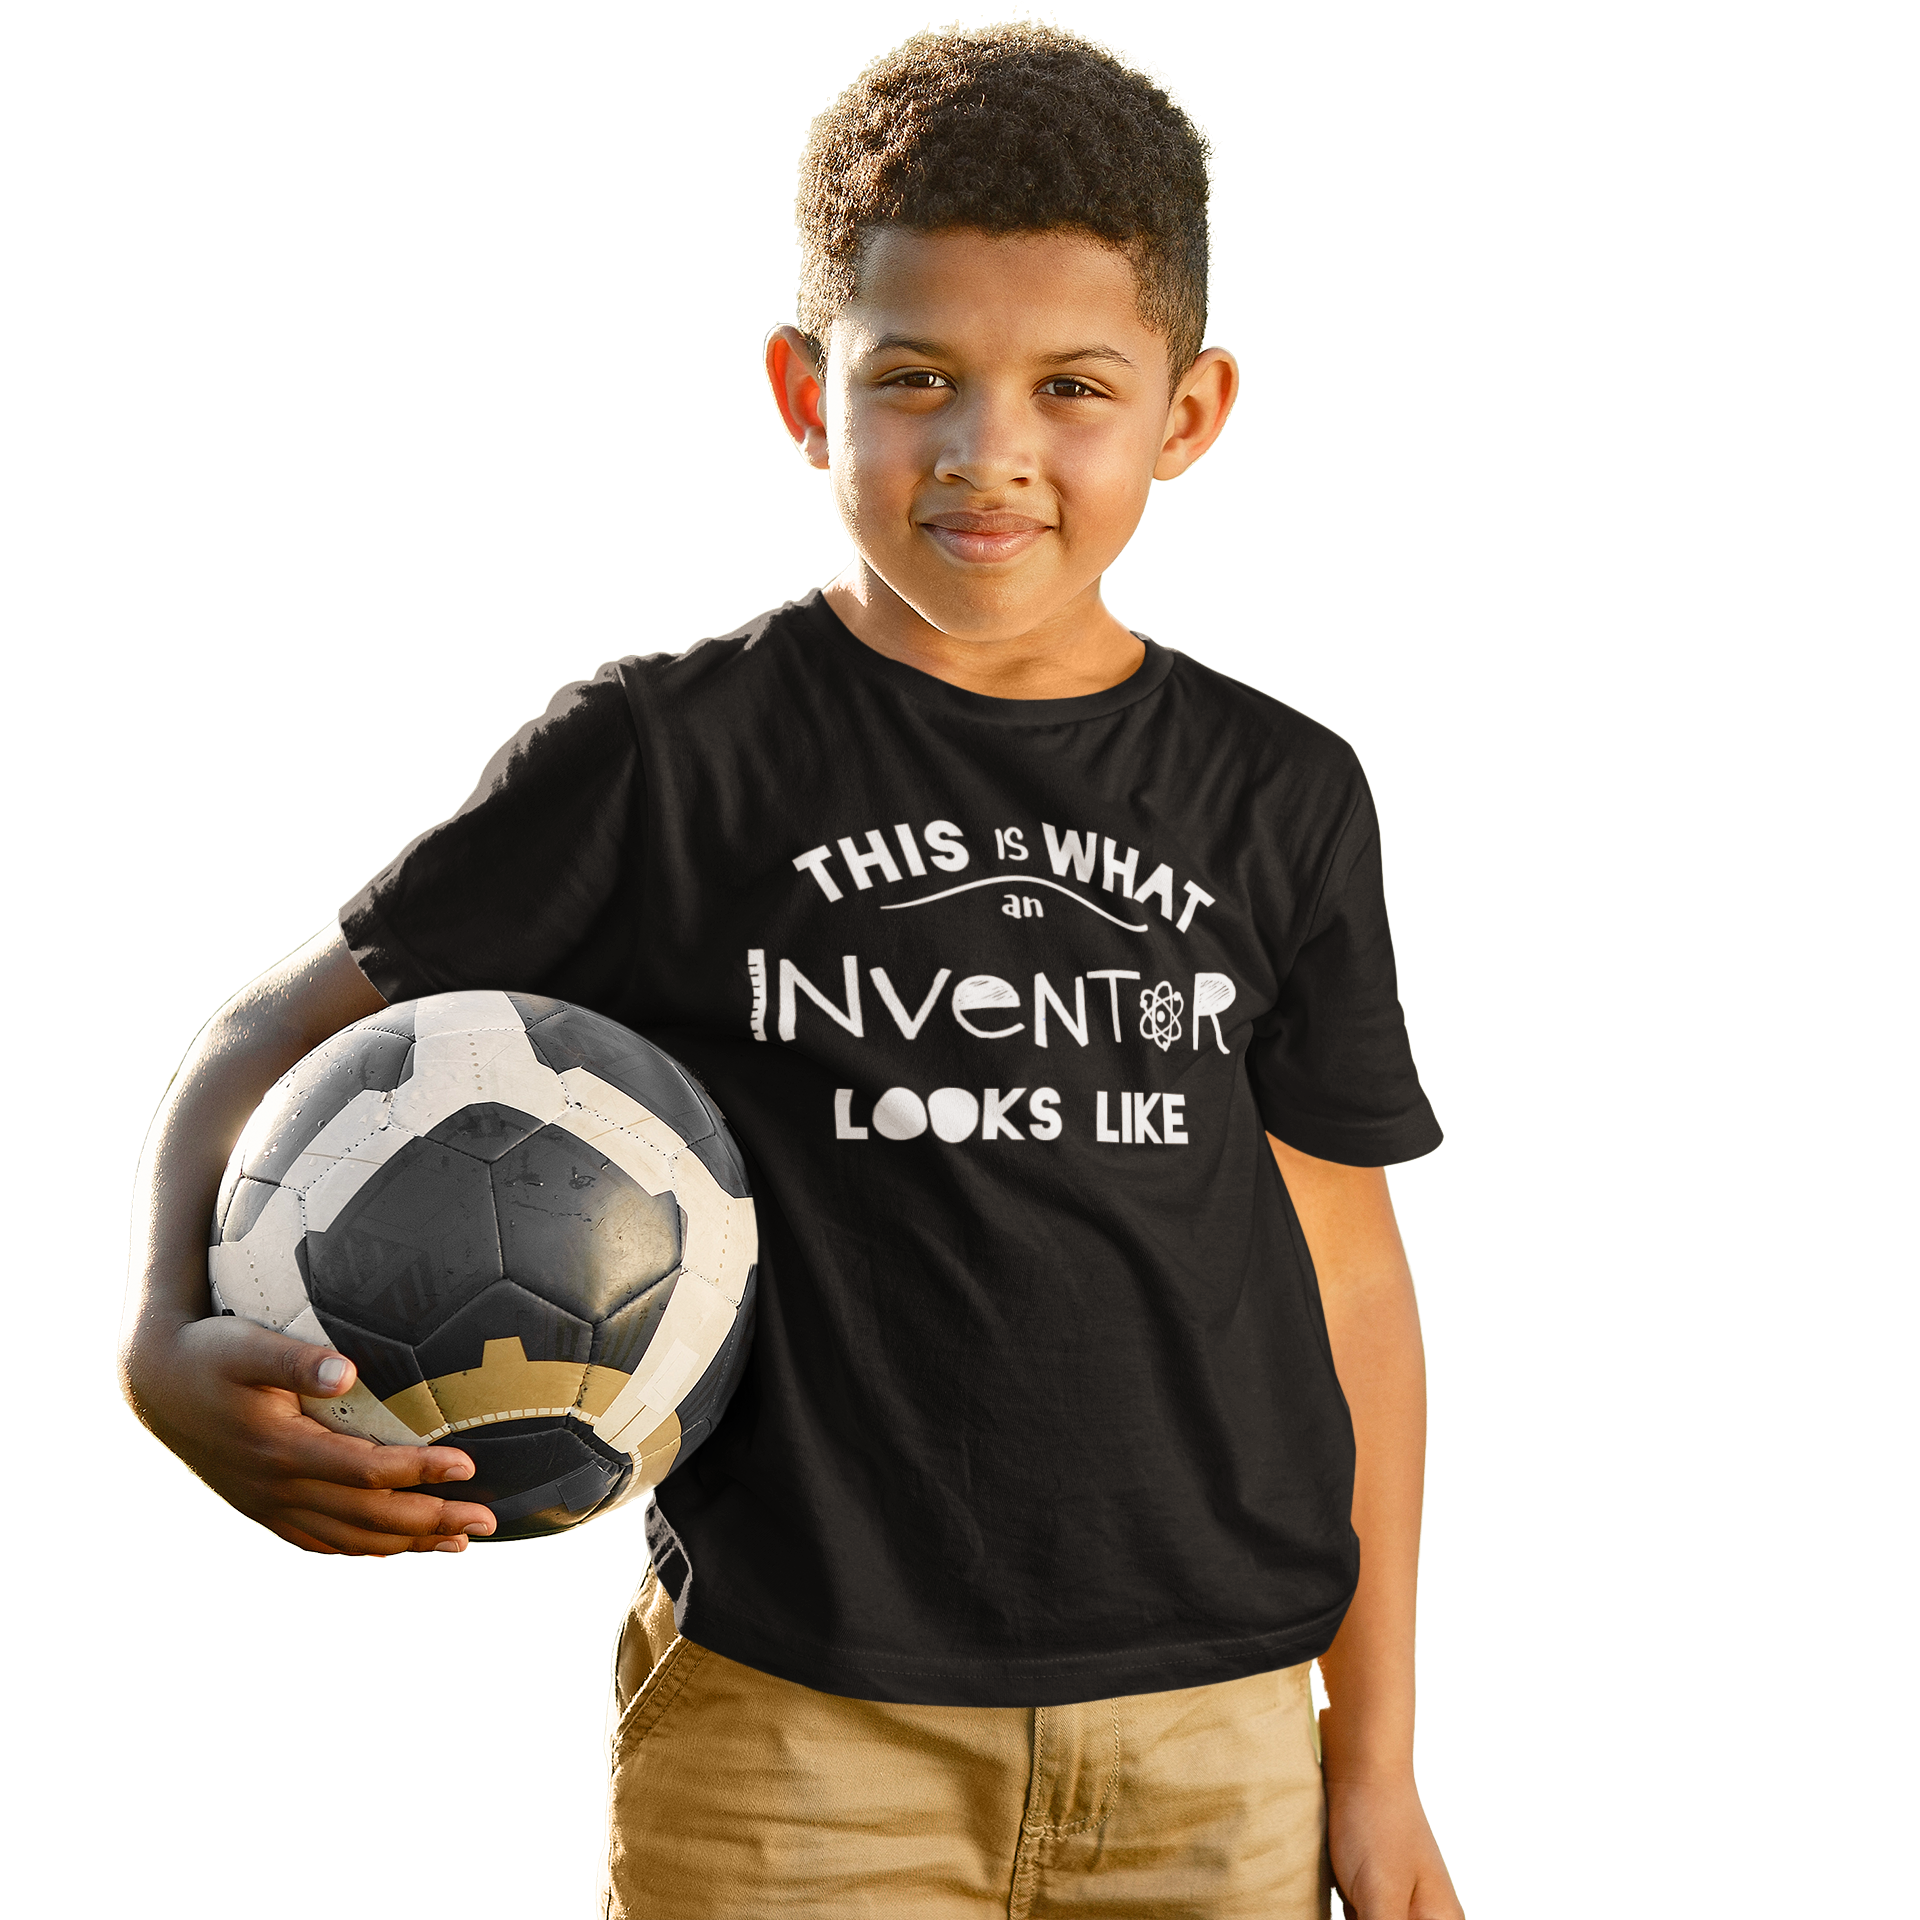 This Is What An Inventor Looks Like Unisex Youth T-shirt - Diverse Kids STEM Books & Activities from SeeSoar Kids